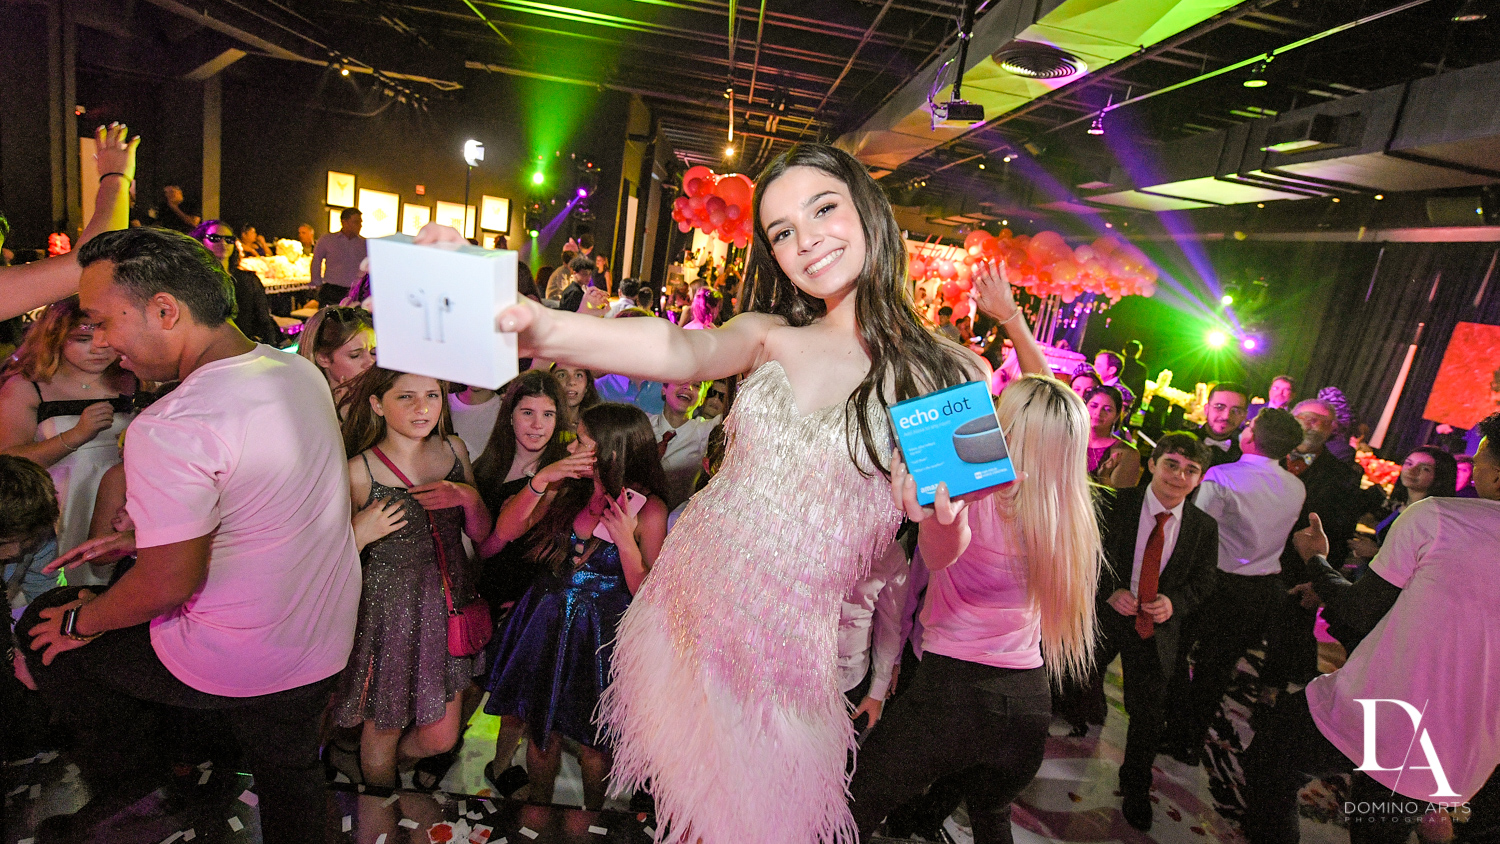 Fashion Theme Bat Mitzvah at Gallery of Amazing Things by Domino Arts Photography